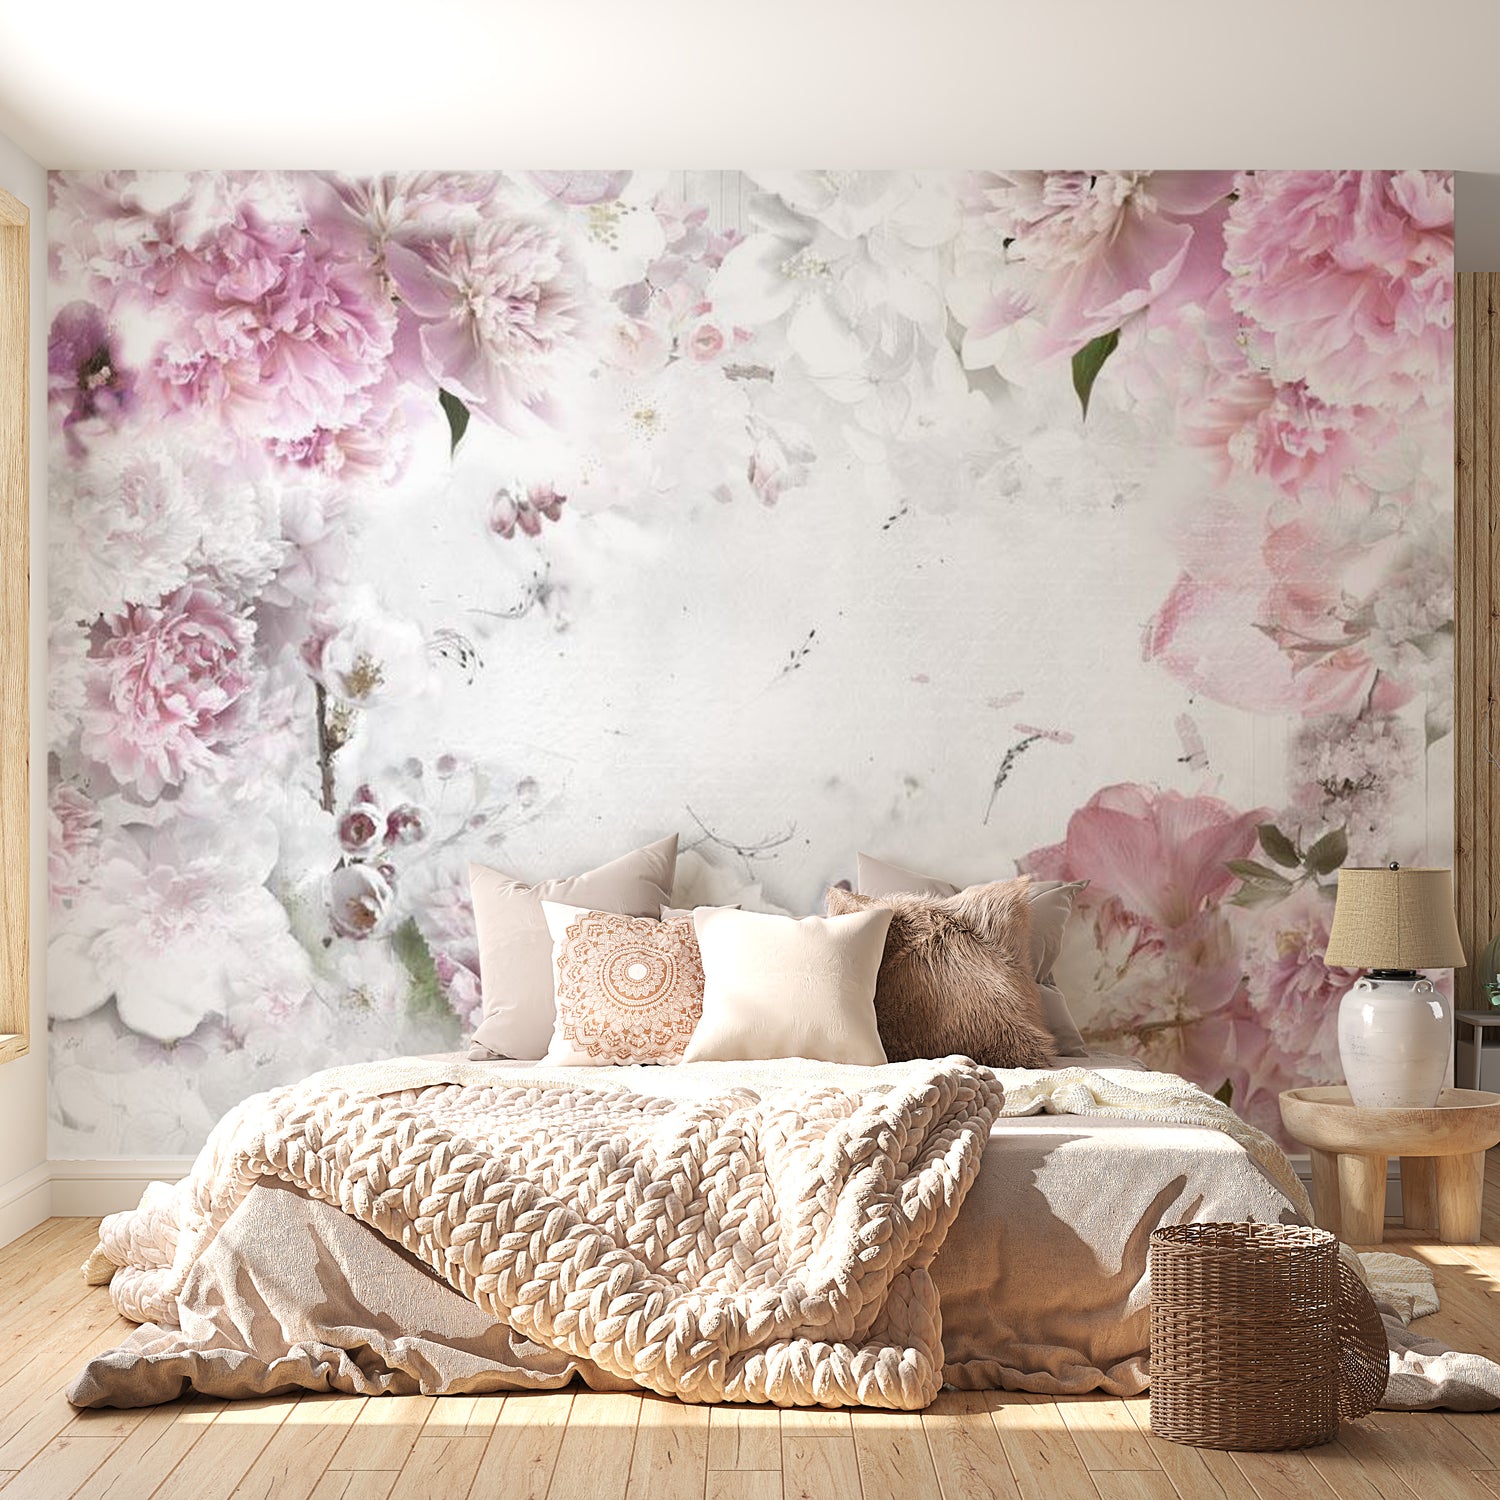 Peel & Stick Floral Wall Mural - Dancing Peonies - Removable Wall Decals